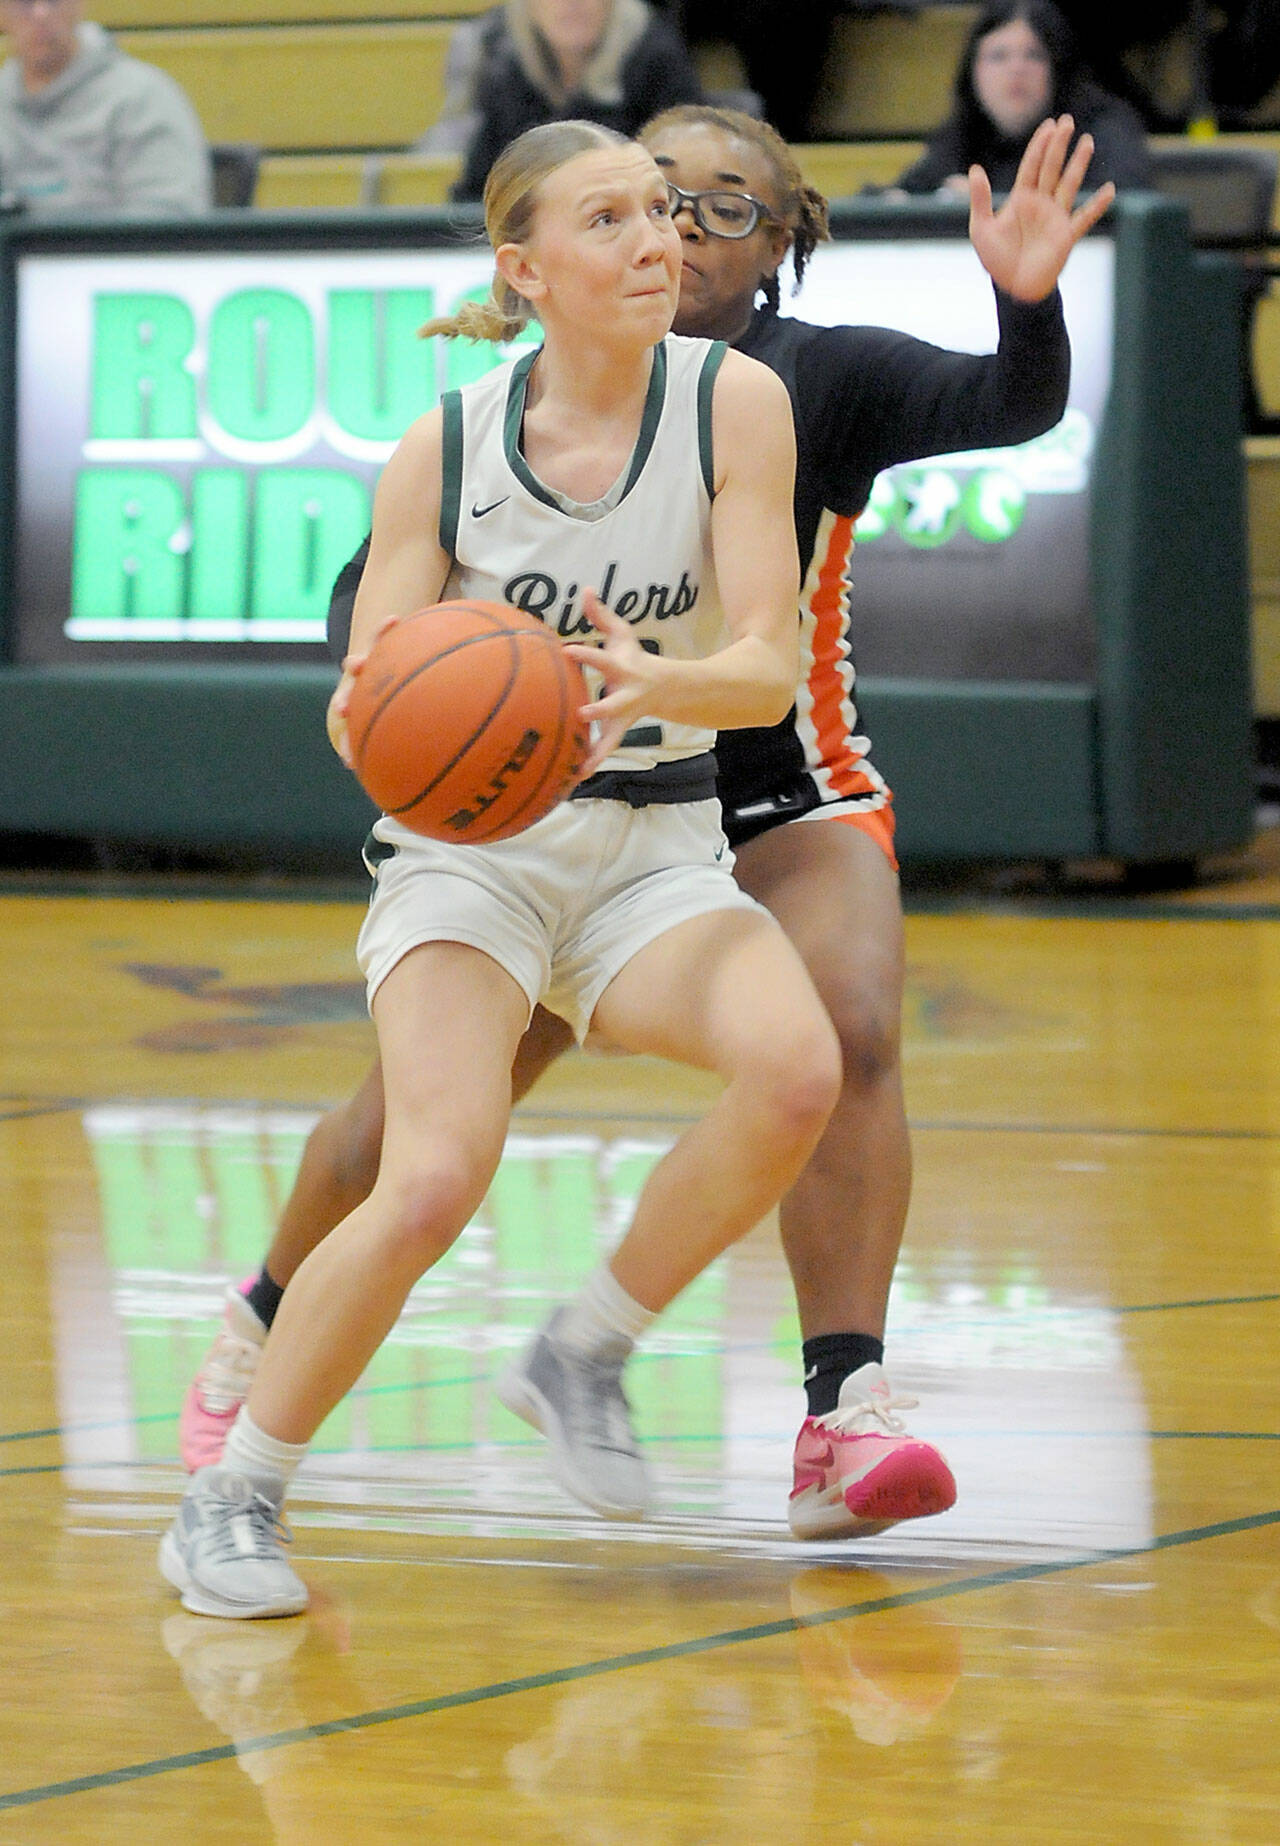 Port Angeles’ Izzy Felton, front, looks towards the lane defended by Central Kitsap’s Callie McCollum during Saturday’s game in Port Angeles. (Keith Thorpe/Peninsula Daily News)